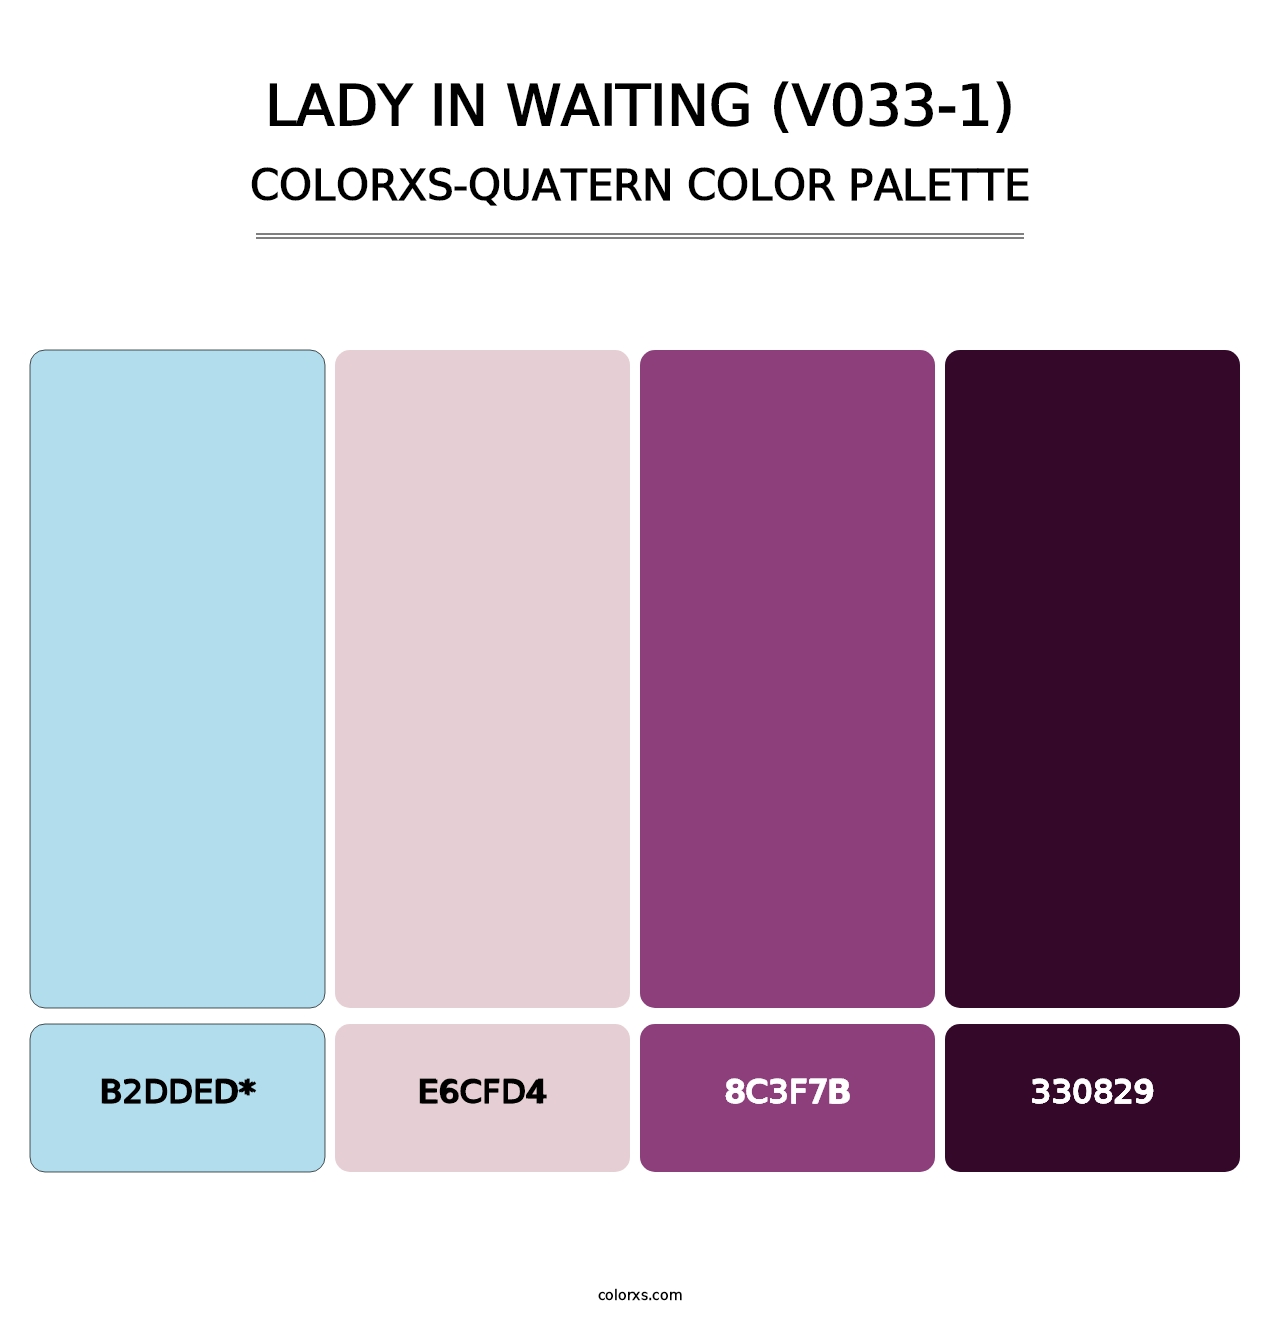 Lady in Waiting (V033-1) - Colorxs Quatern Palette